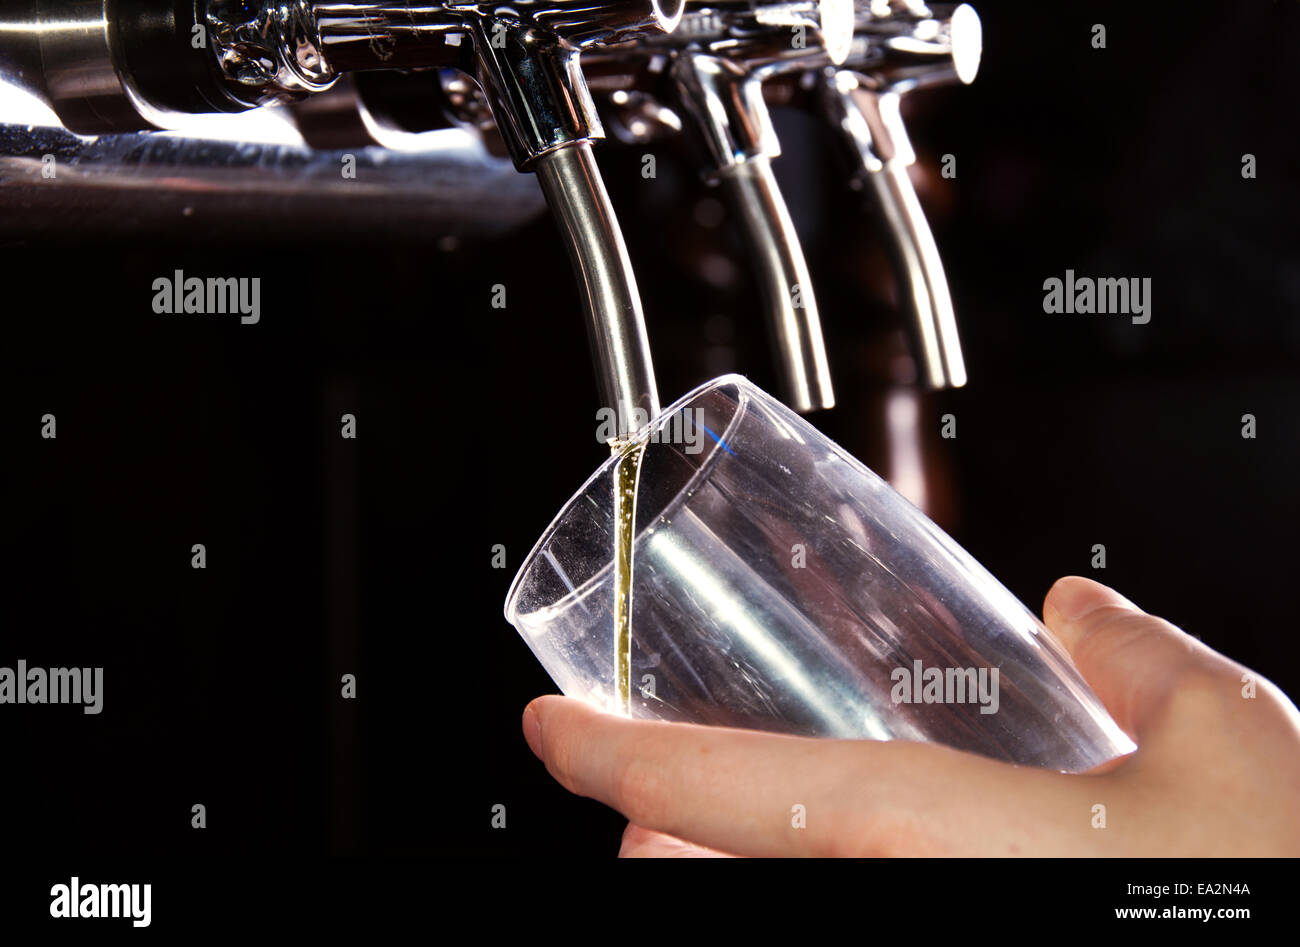 Alcohol conceptual image. Bartender giving the beer from dispenser. Stock Photo